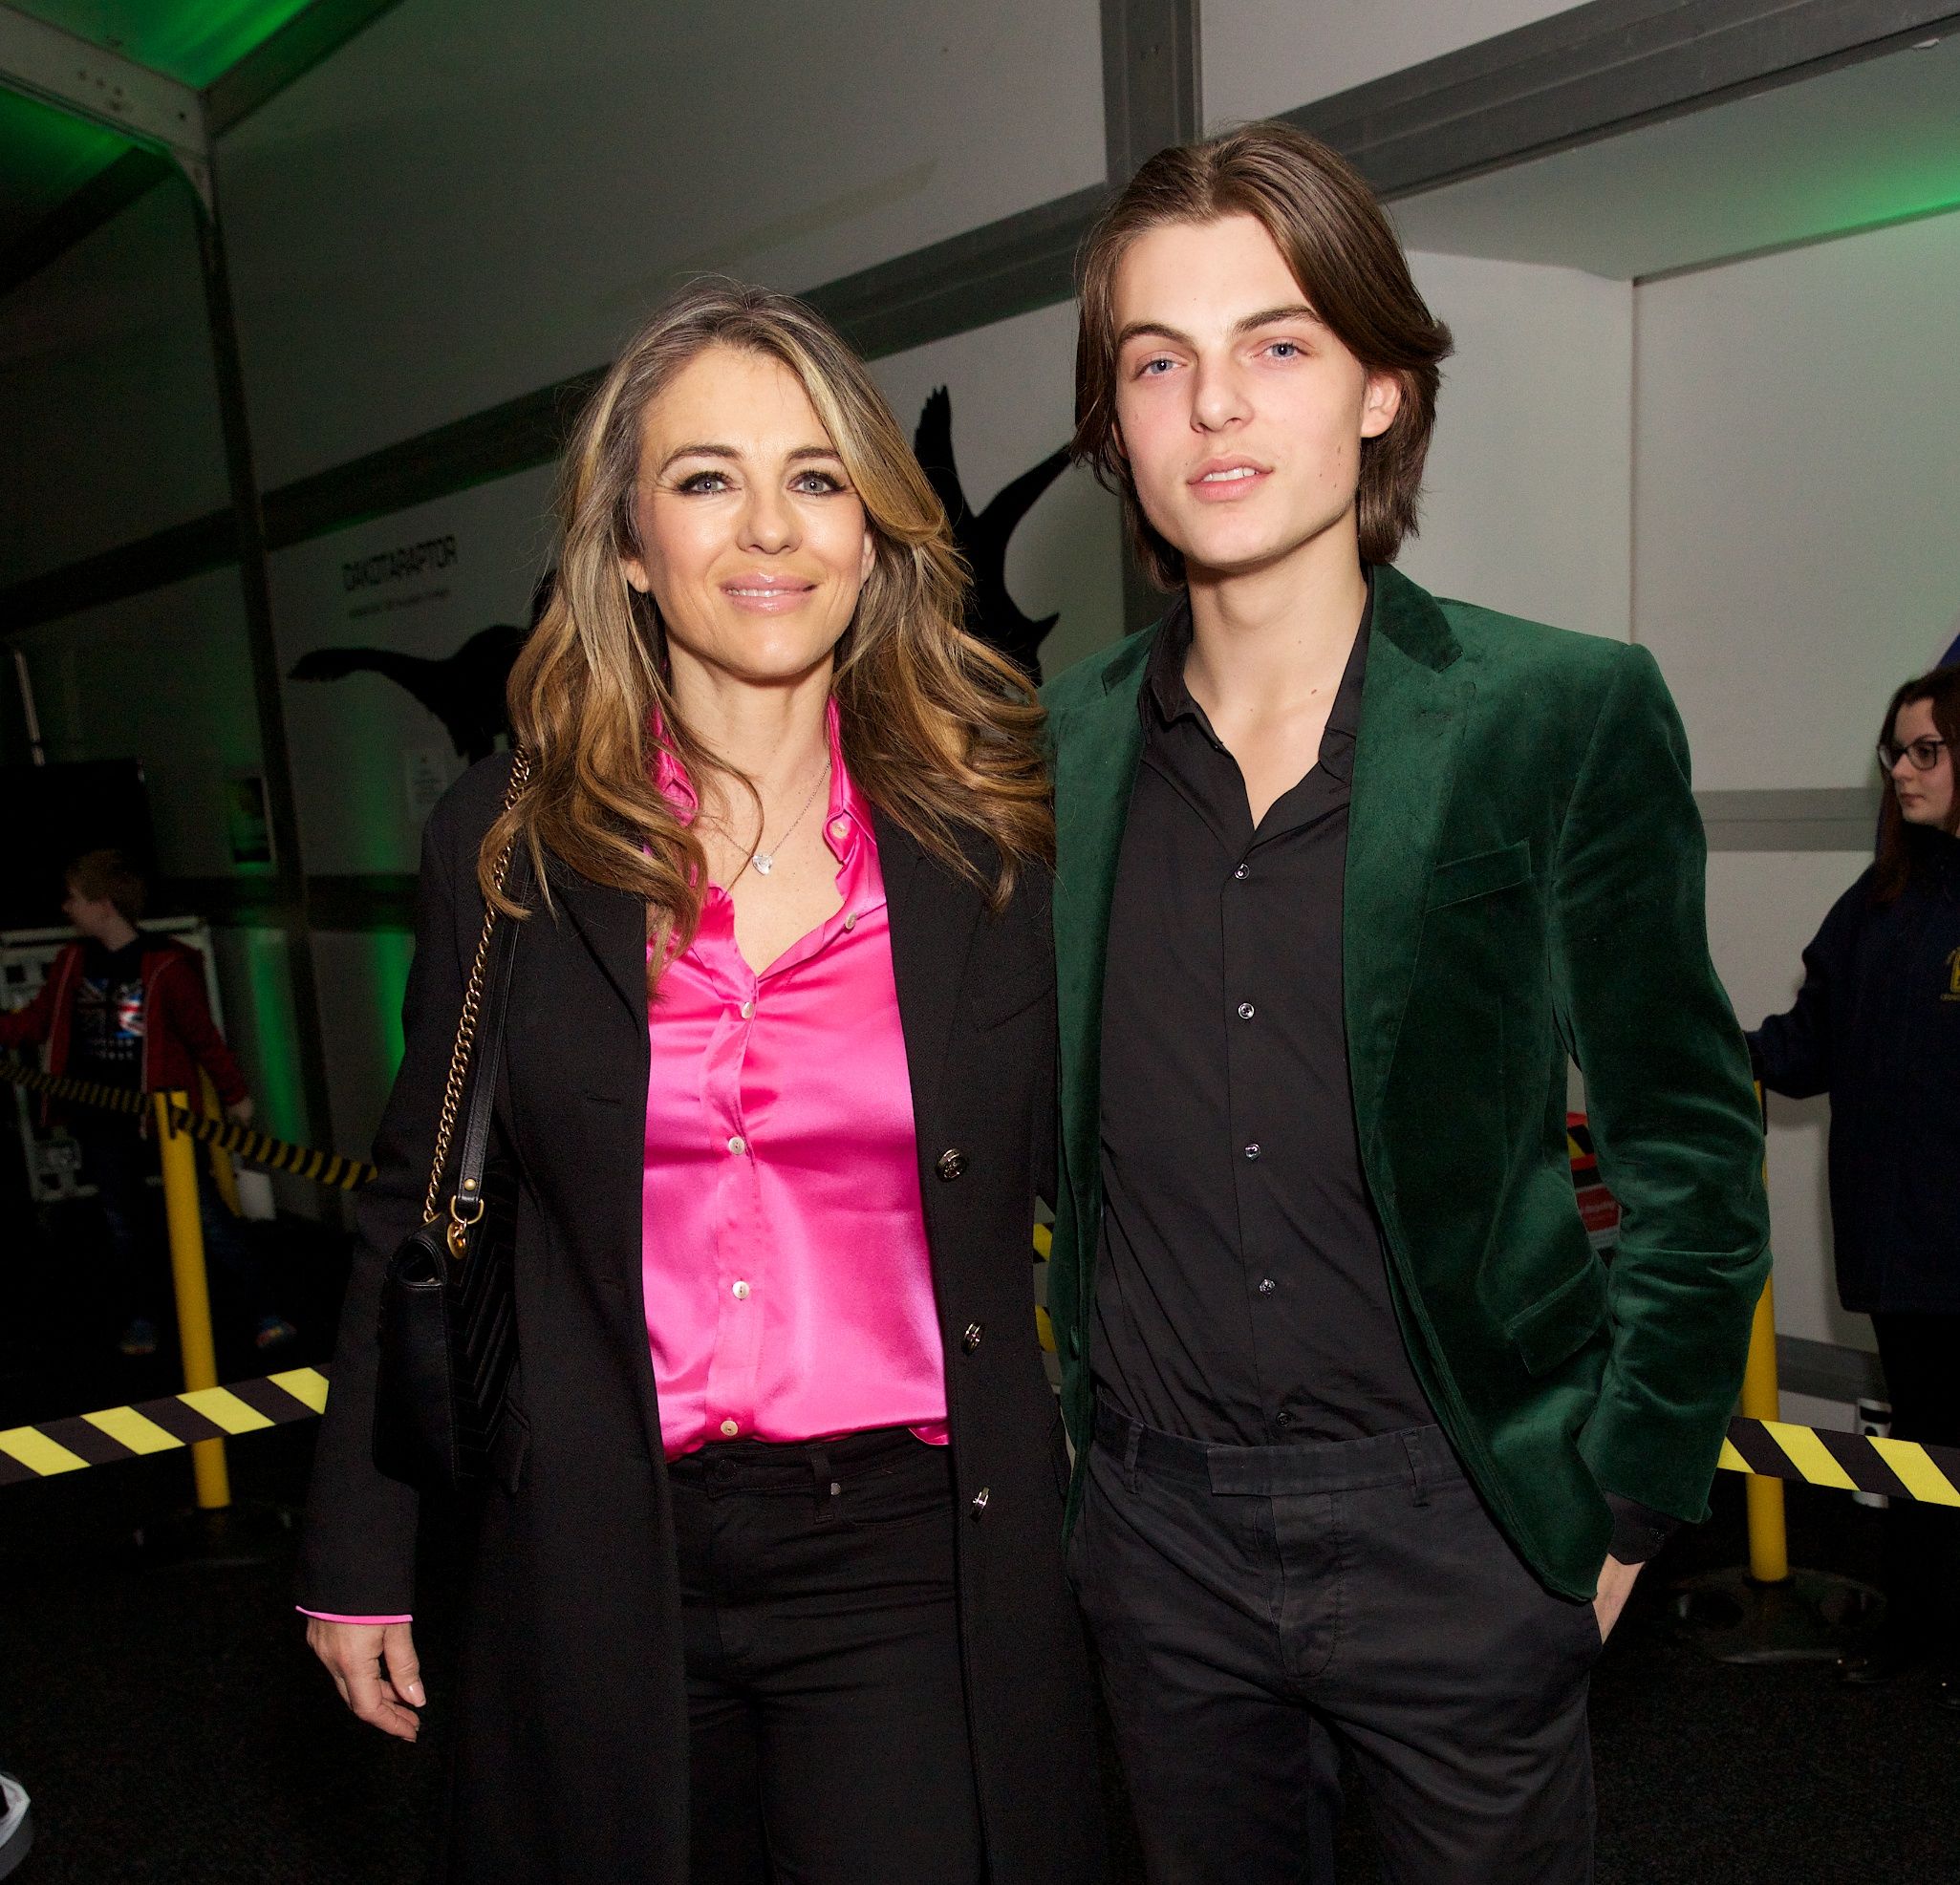 Elizabeth Hurley Didn't Know Son Was Voted 'Sexiest Offspring'